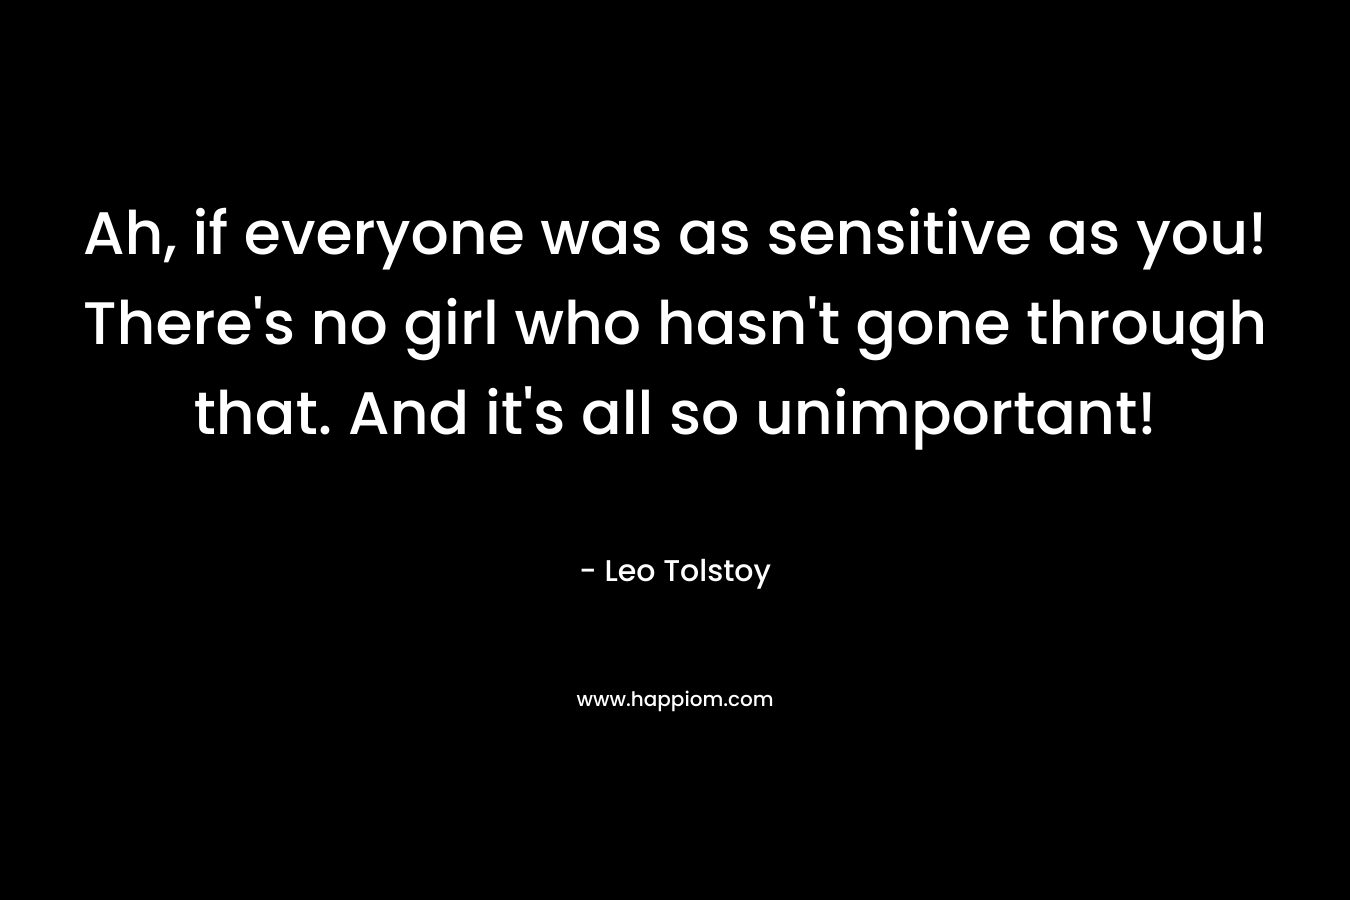 Ah, if everyone was as sensitive as you! There’s no girl who hasn’t gone through that. And it’s all so unimportant! – Leo Tolstoy